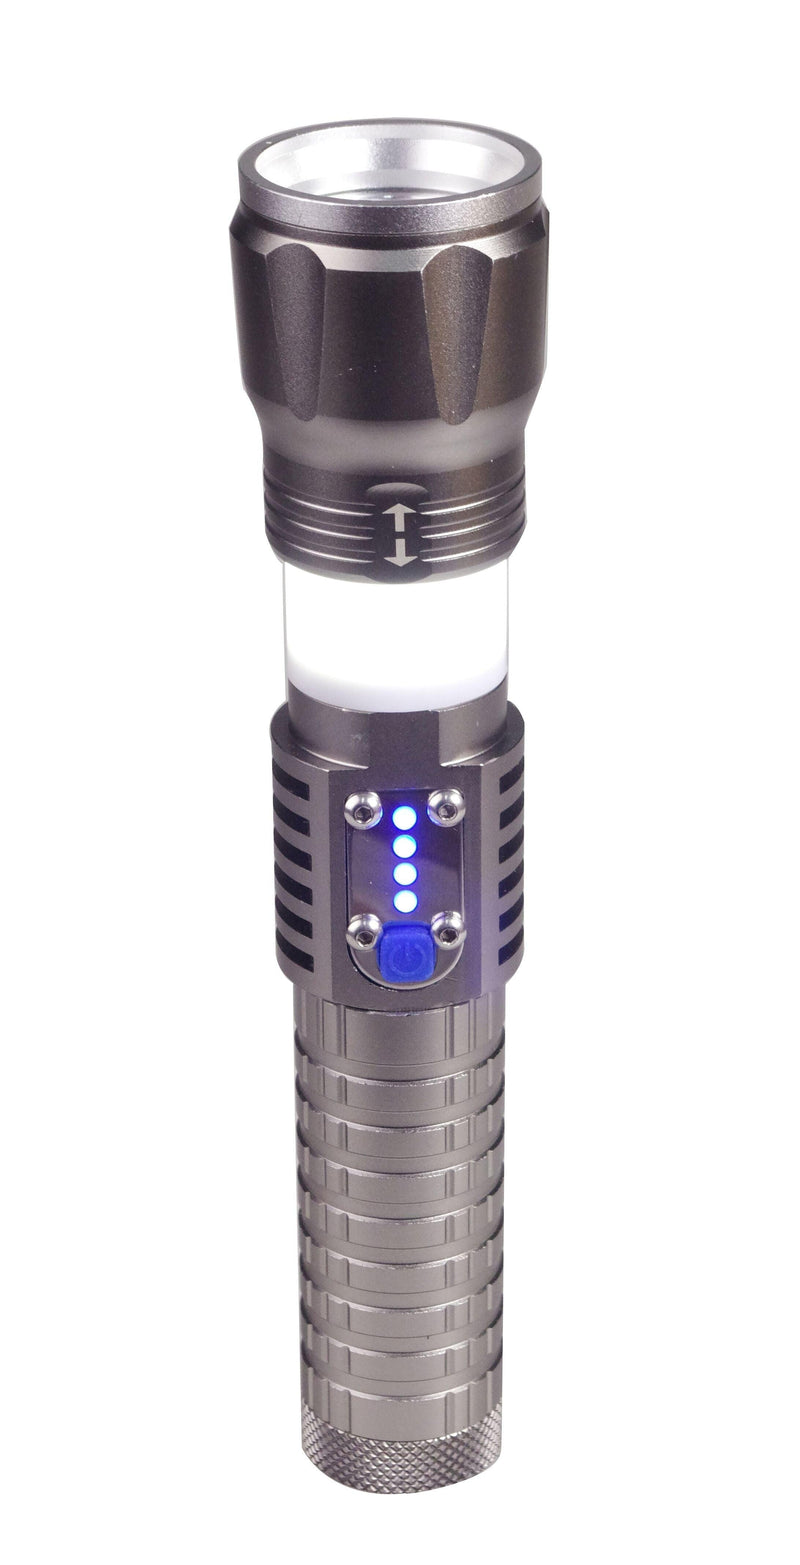 Extreme flashlight and power bank available for bulk wholesale and discounted prices. Lantern feature as well.